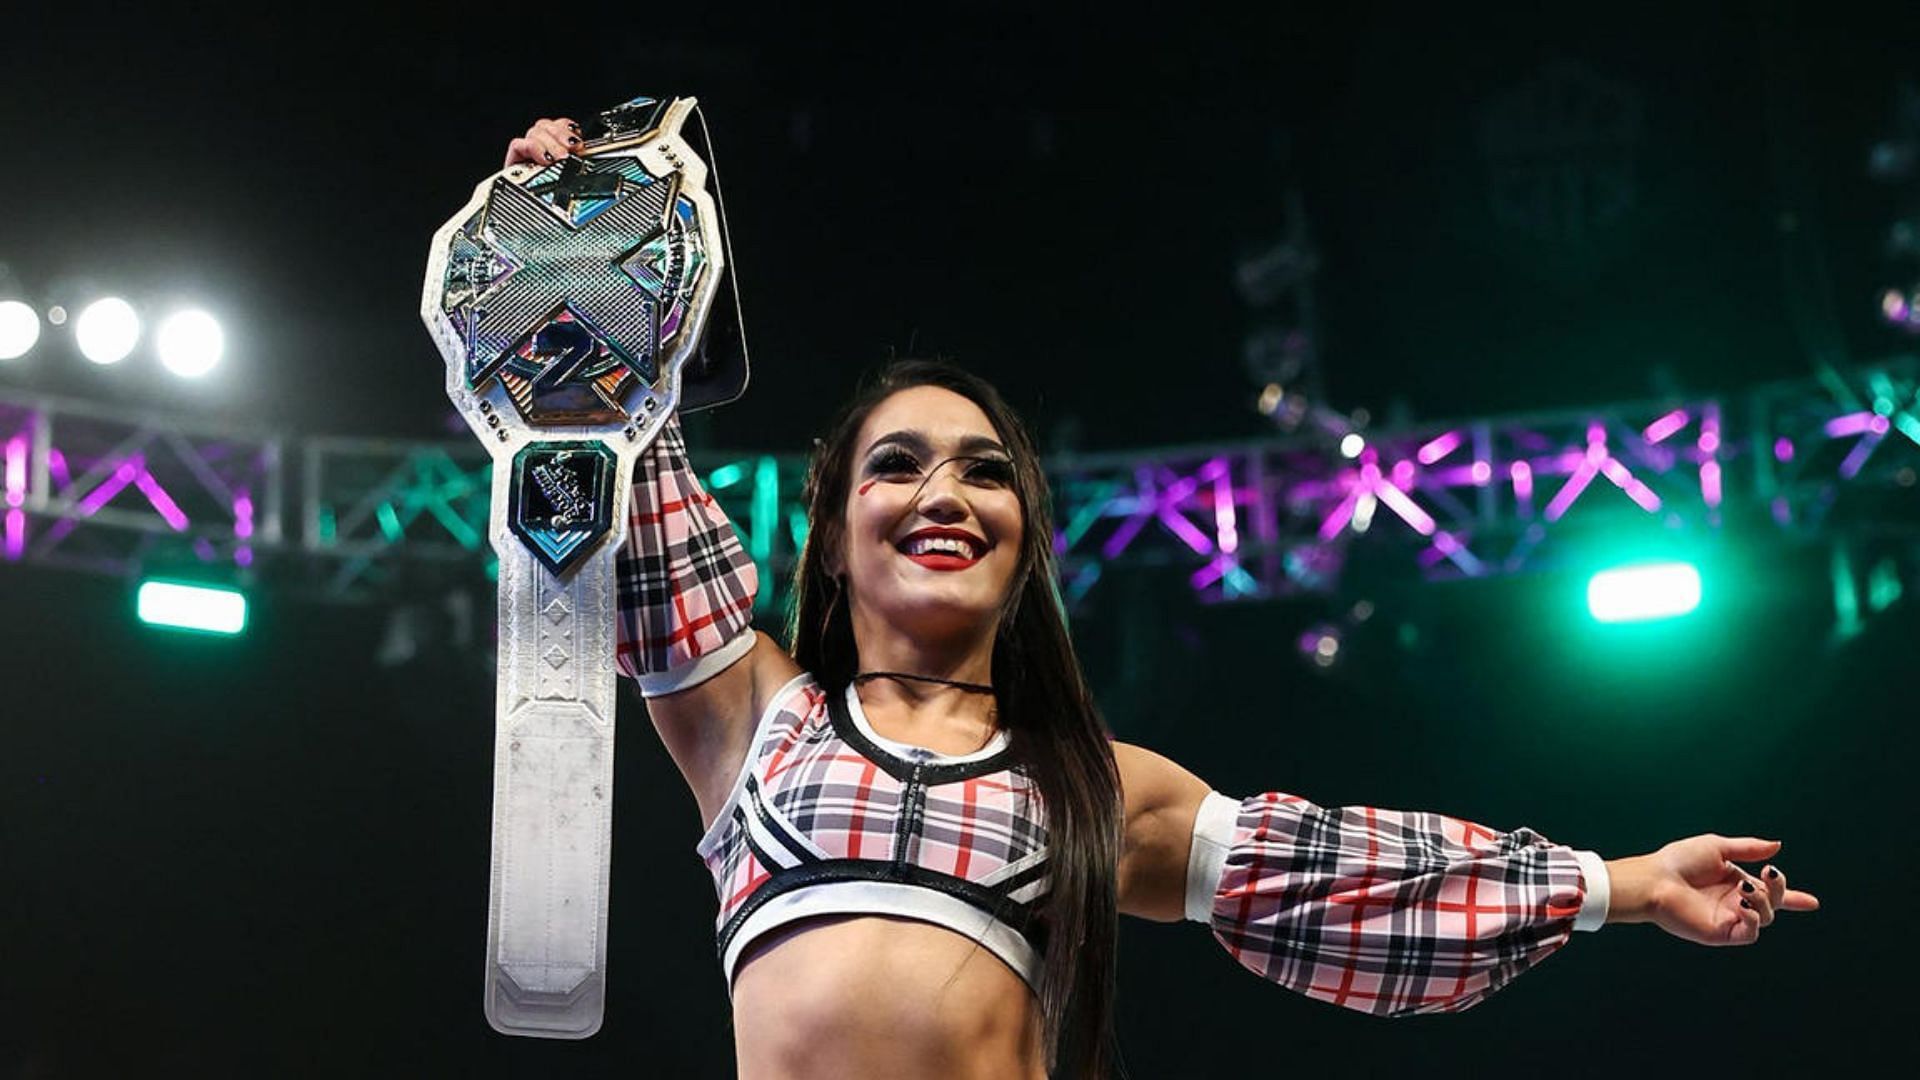 Roxanne Perez is the current NXT Women